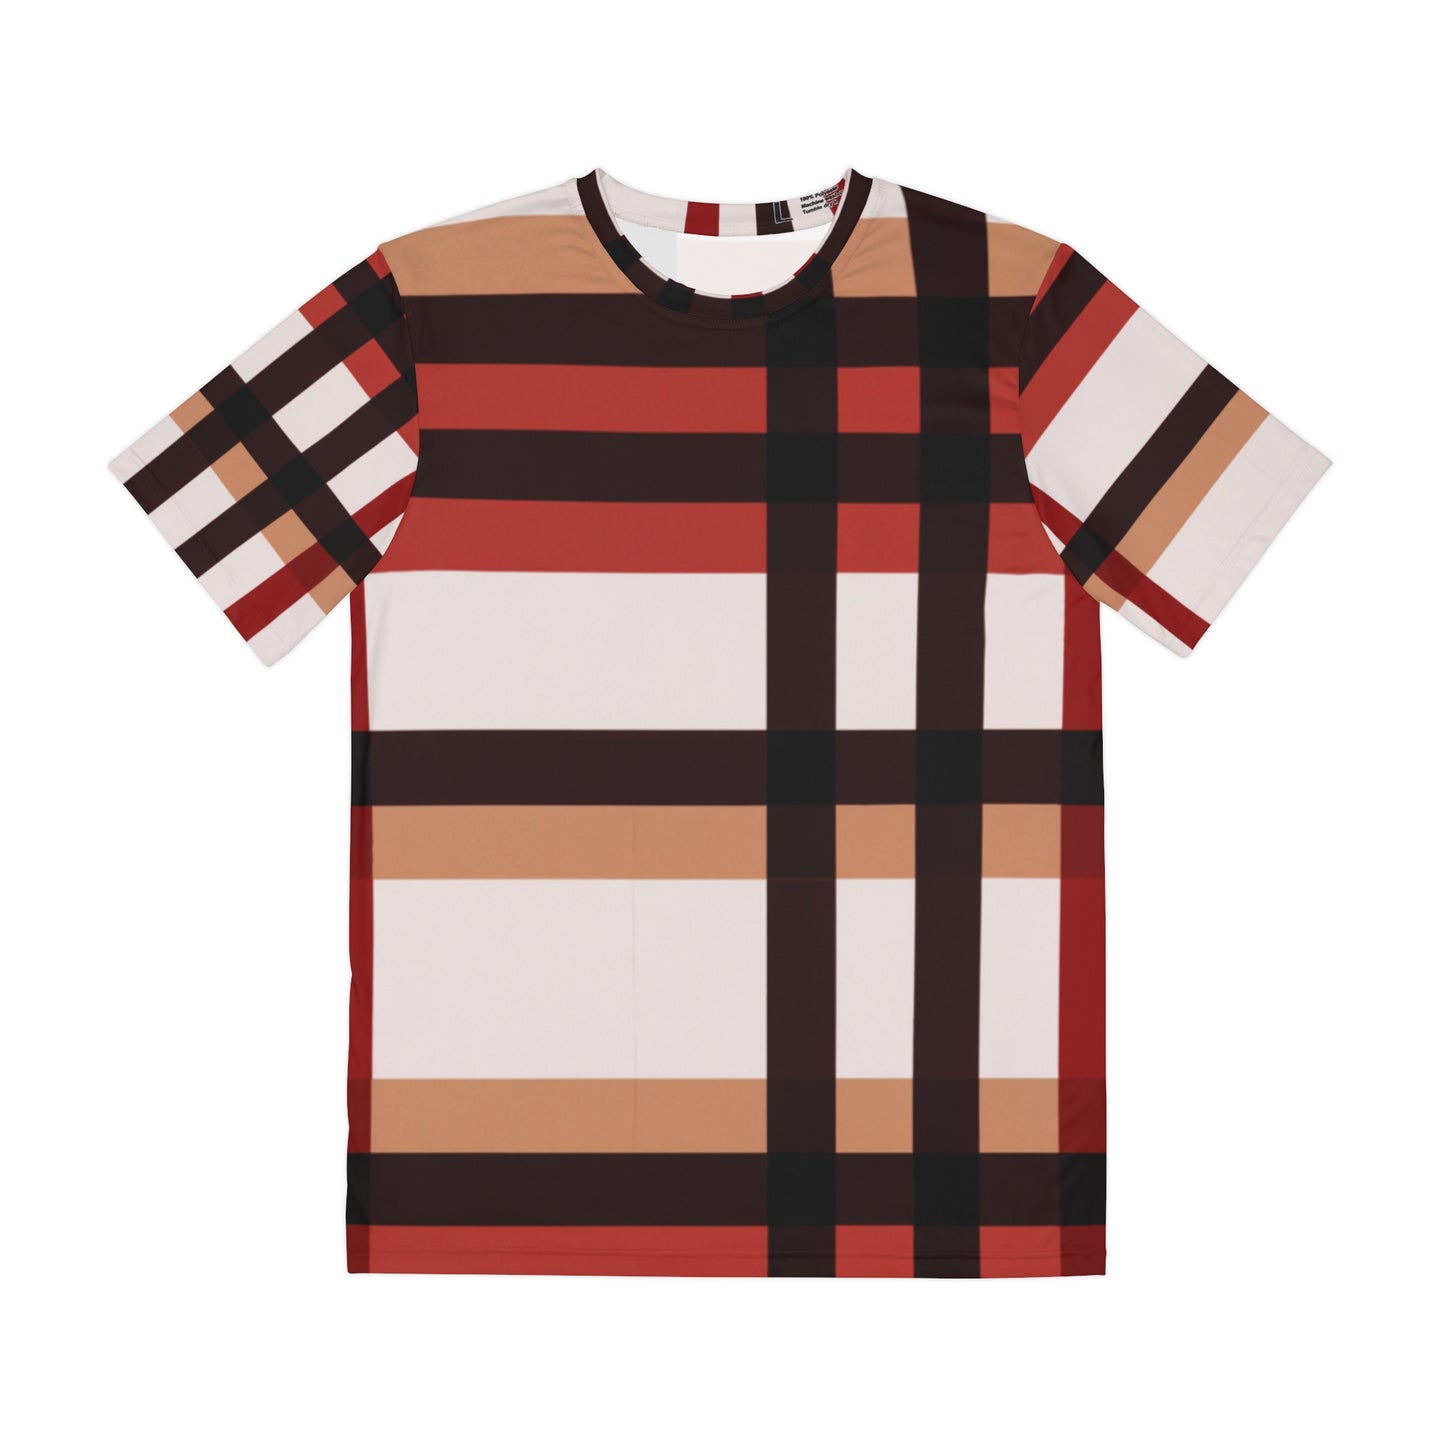 Front view of the Highlander's Array Crewneck Pullover All-Over Print Short-Sleeved Shirt white red black beige plaid pattern